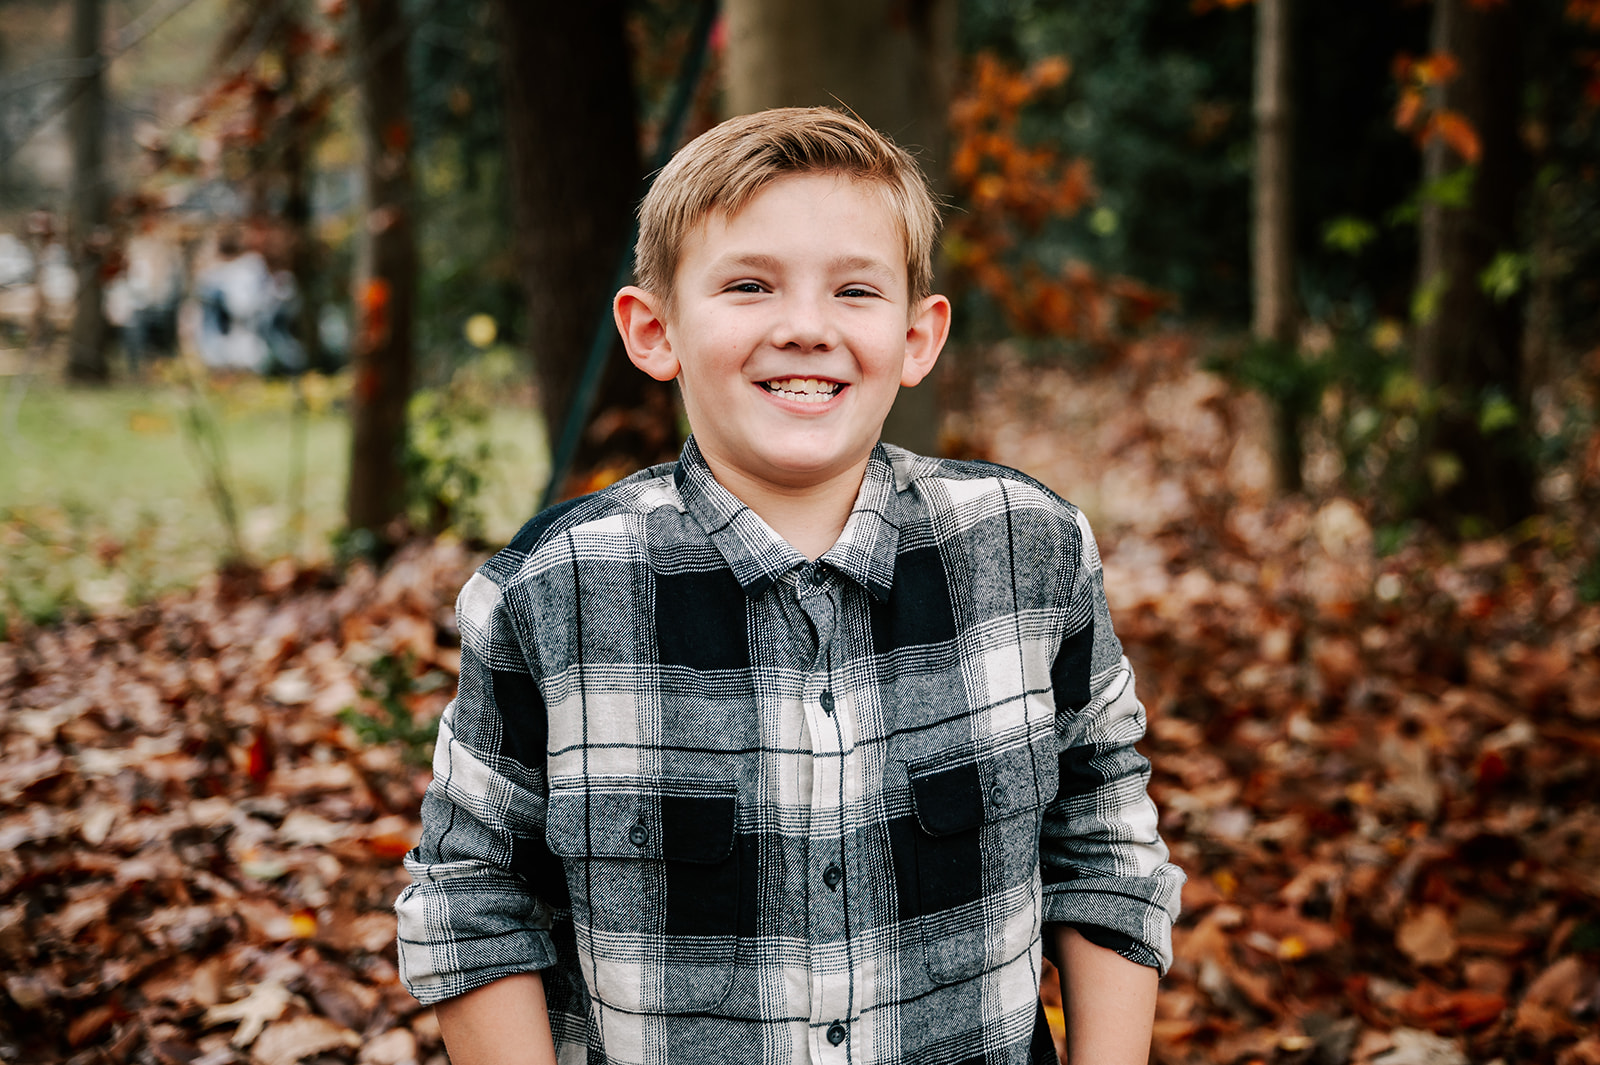 A young boy in a black plaid shirt stands amongst fallen leaves with hands in his pockets Raleigh Fall Activities